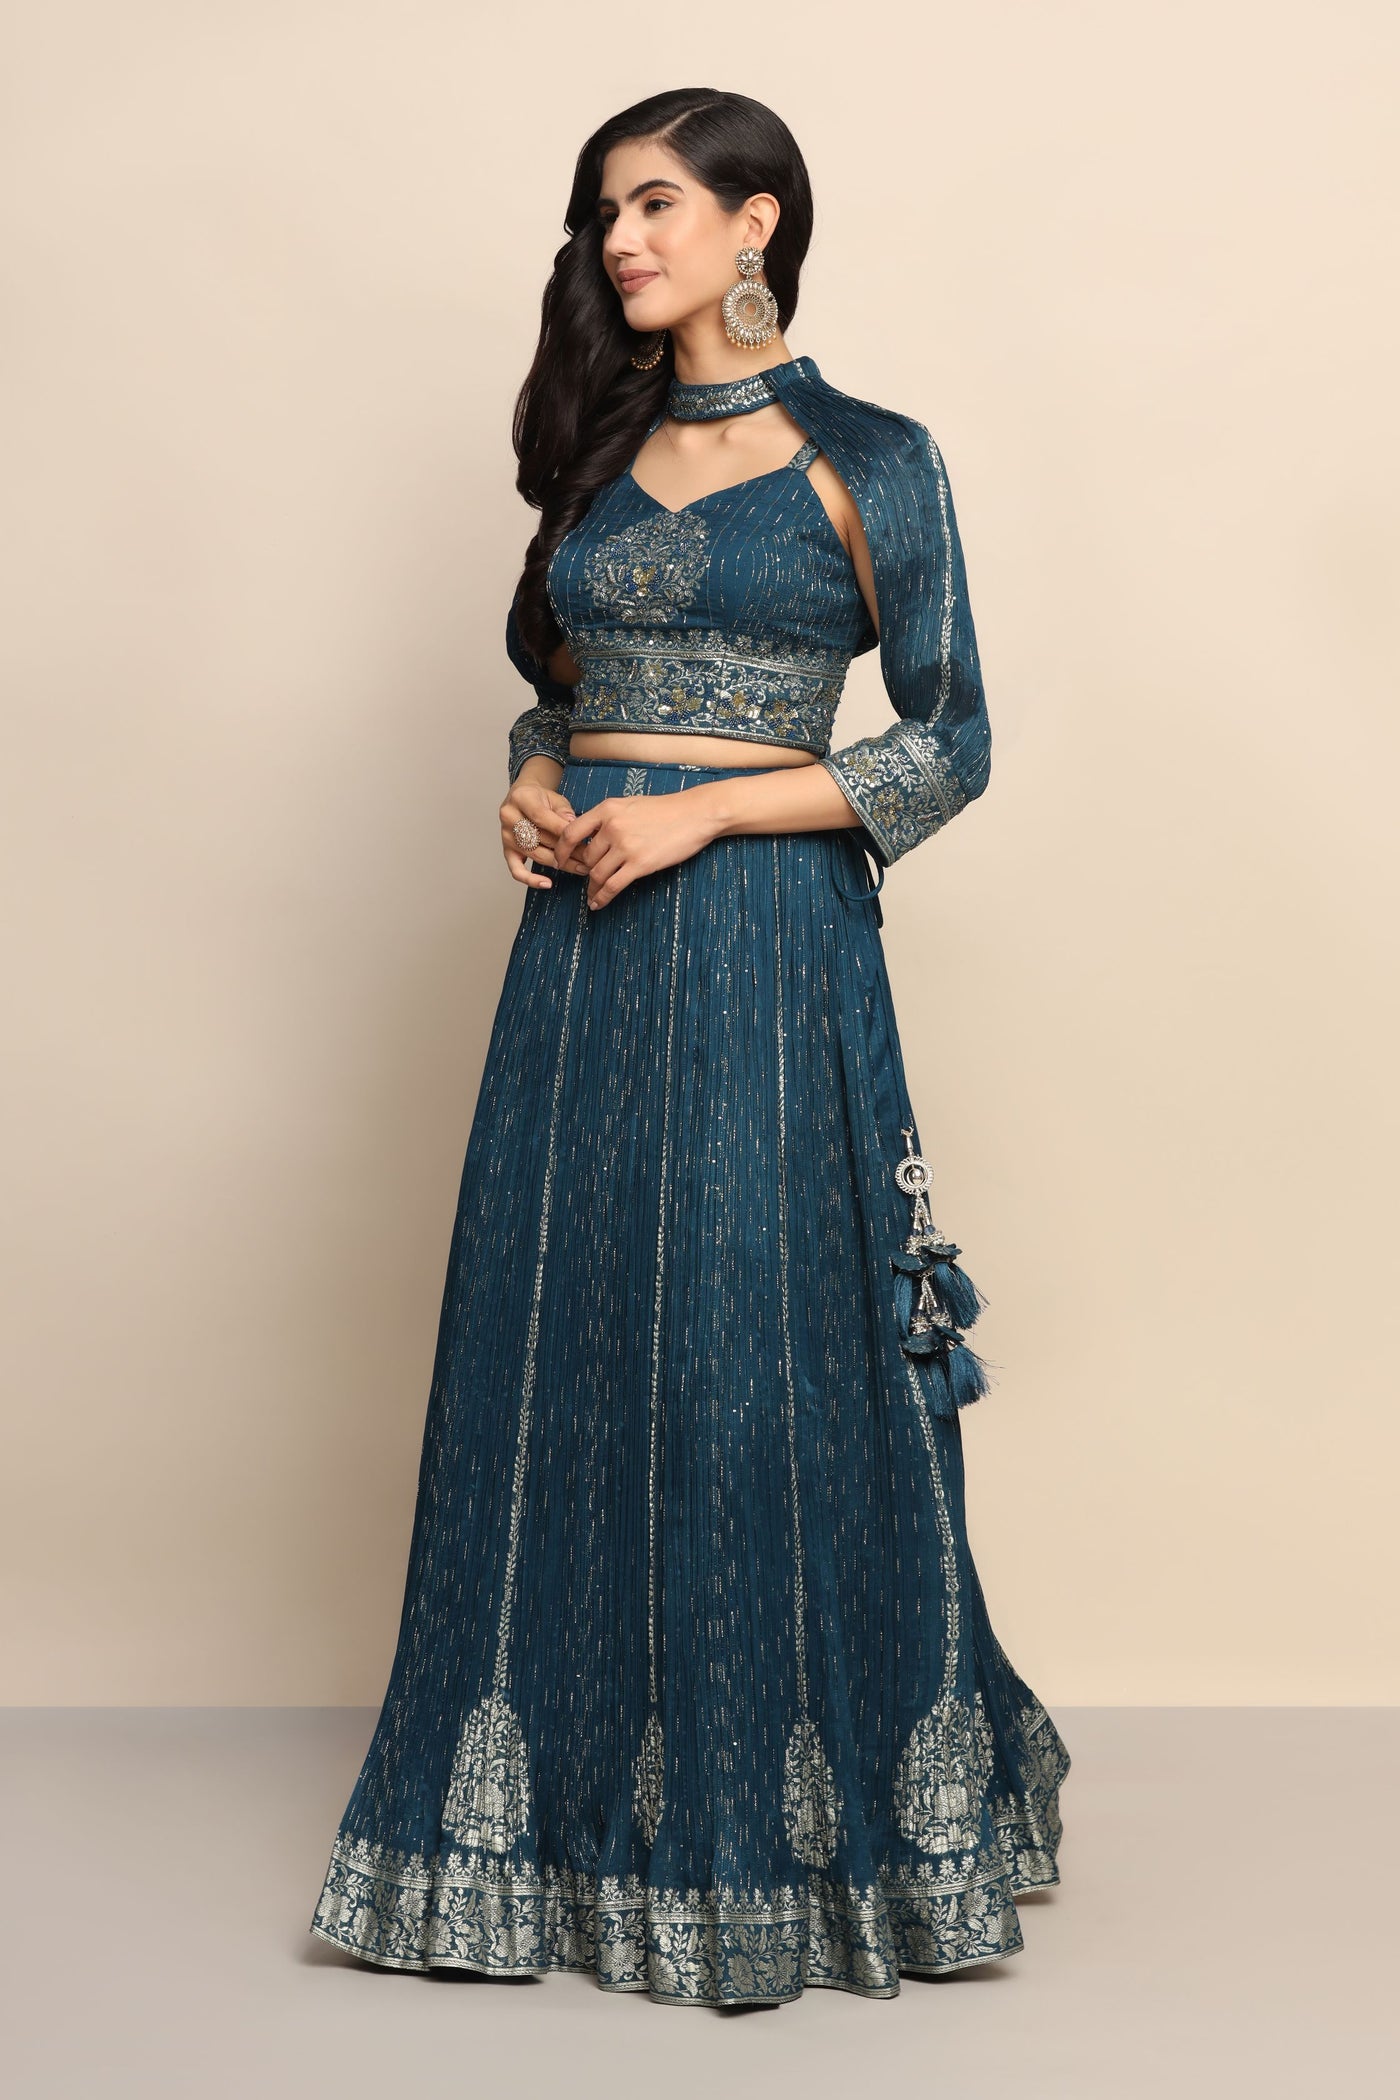 Captivating Royal Blue Sequin Dress with Thread Work and Cut Dana Embellishments